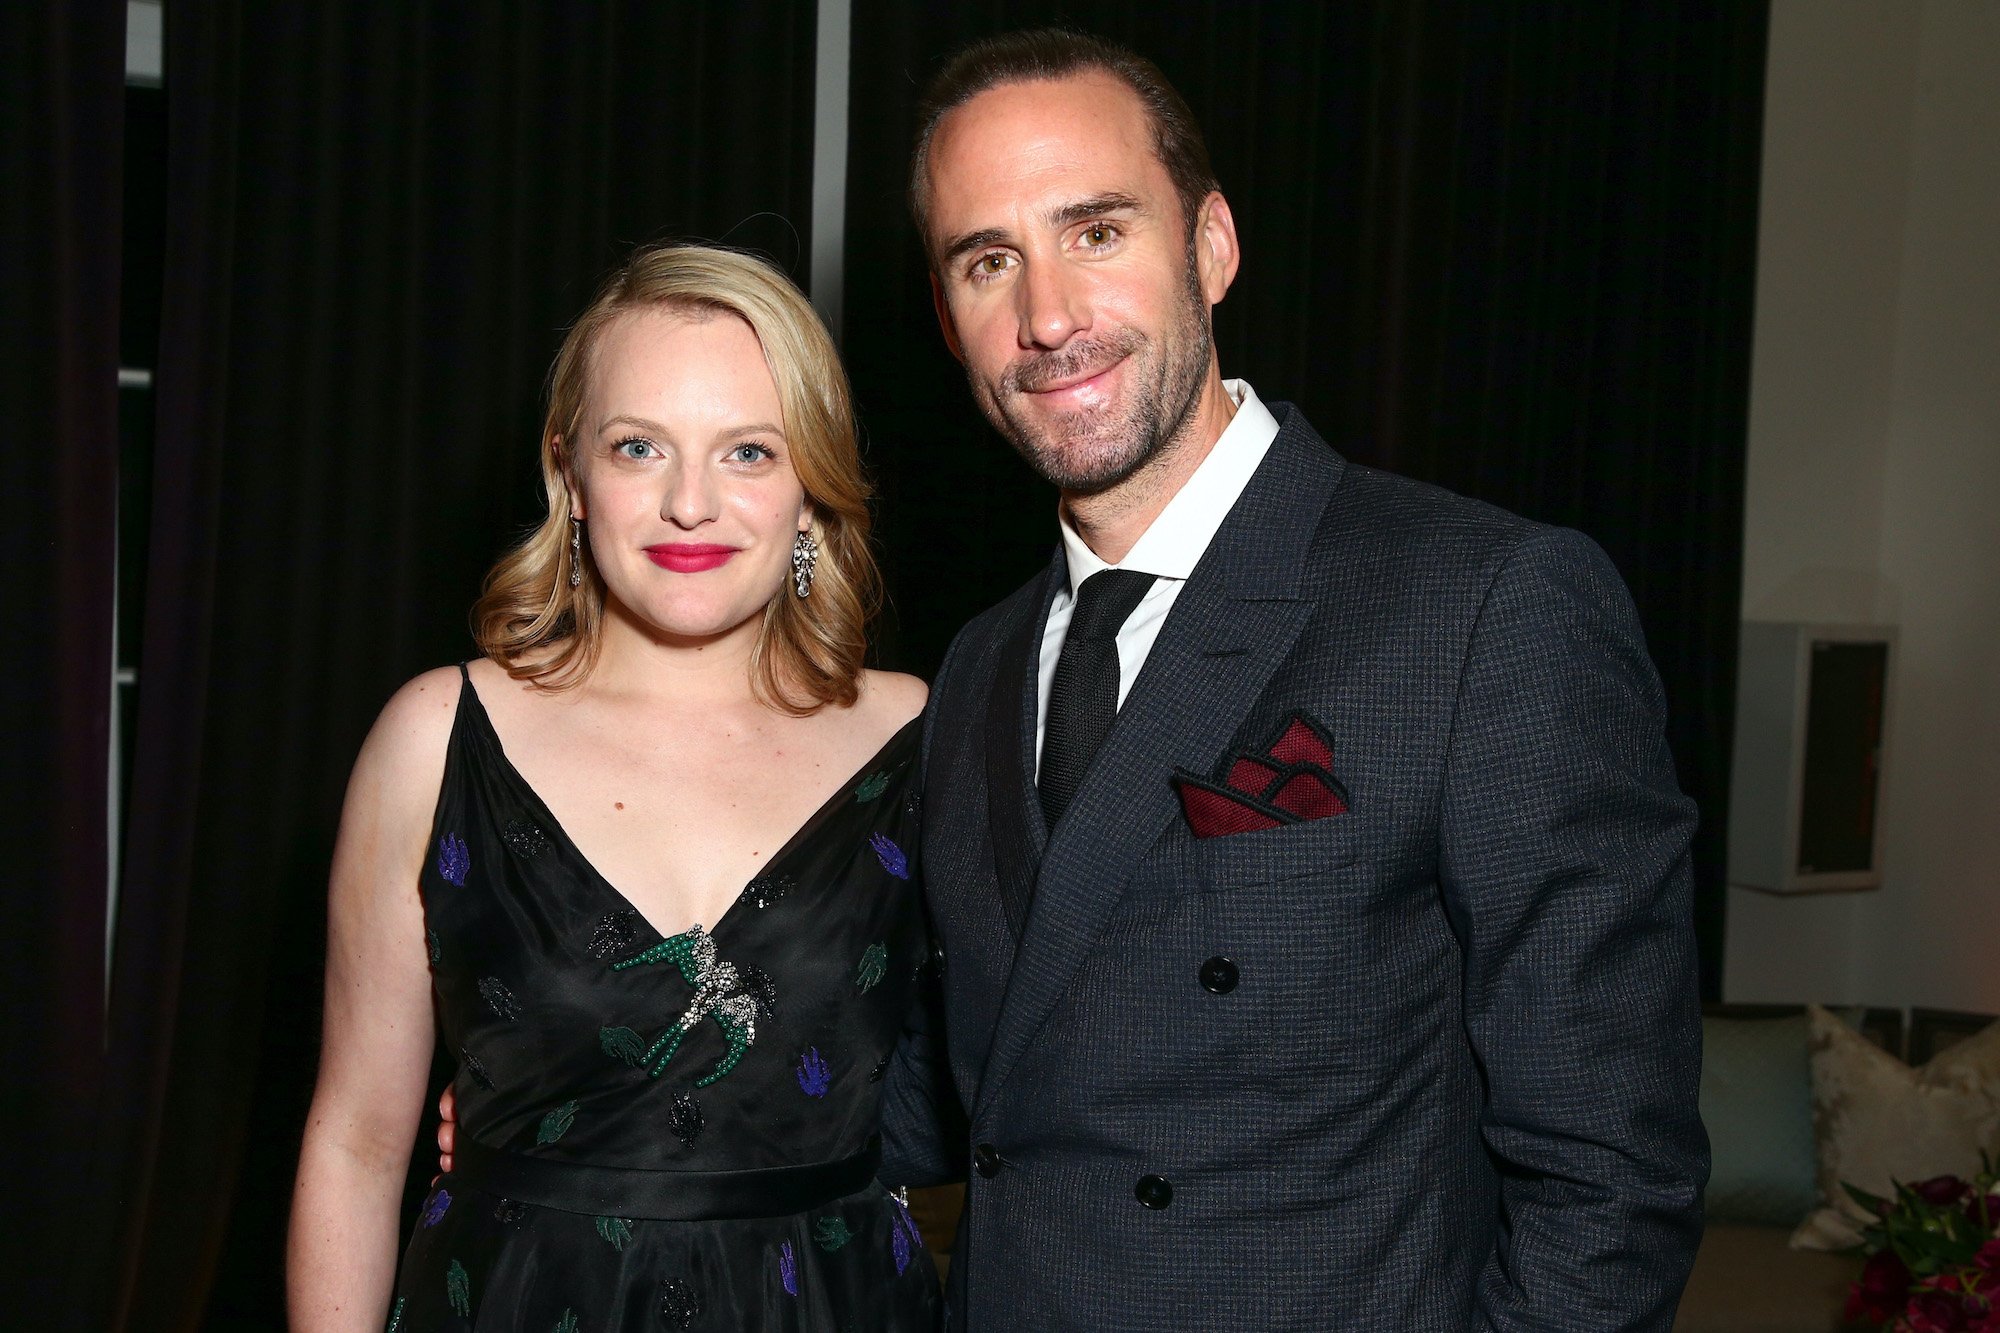 Elisabeth Moss and Joseph Fiennes smiling in front of a black curtain